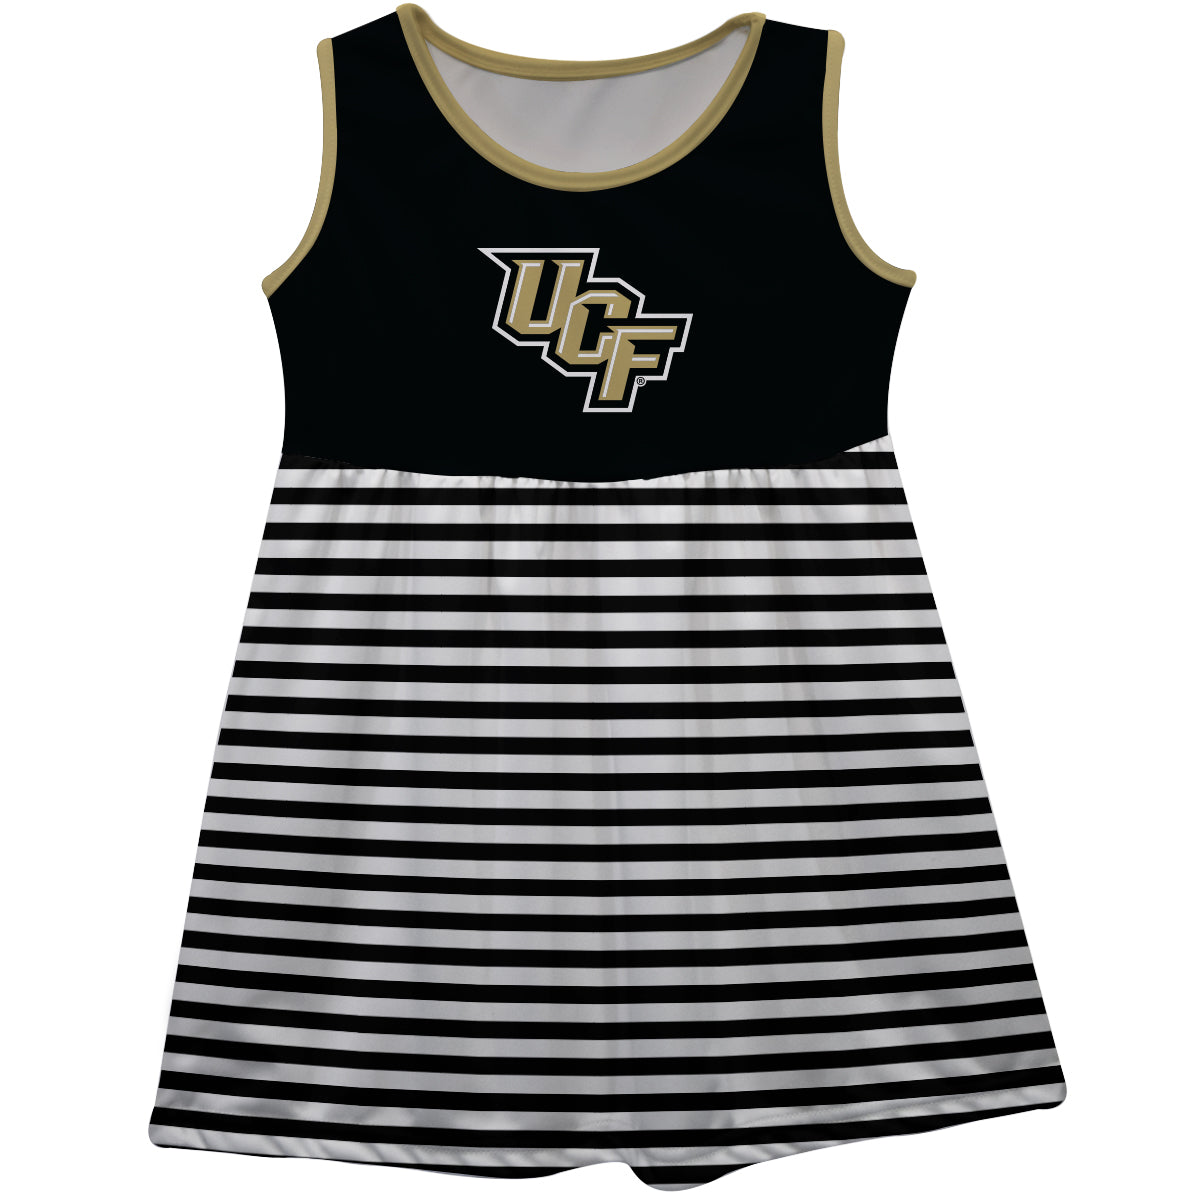 UCF Knights Black and White Sleeveless Tank Dress with Stripes on Skirt by Vive La Fete-Campus-Wardrobe